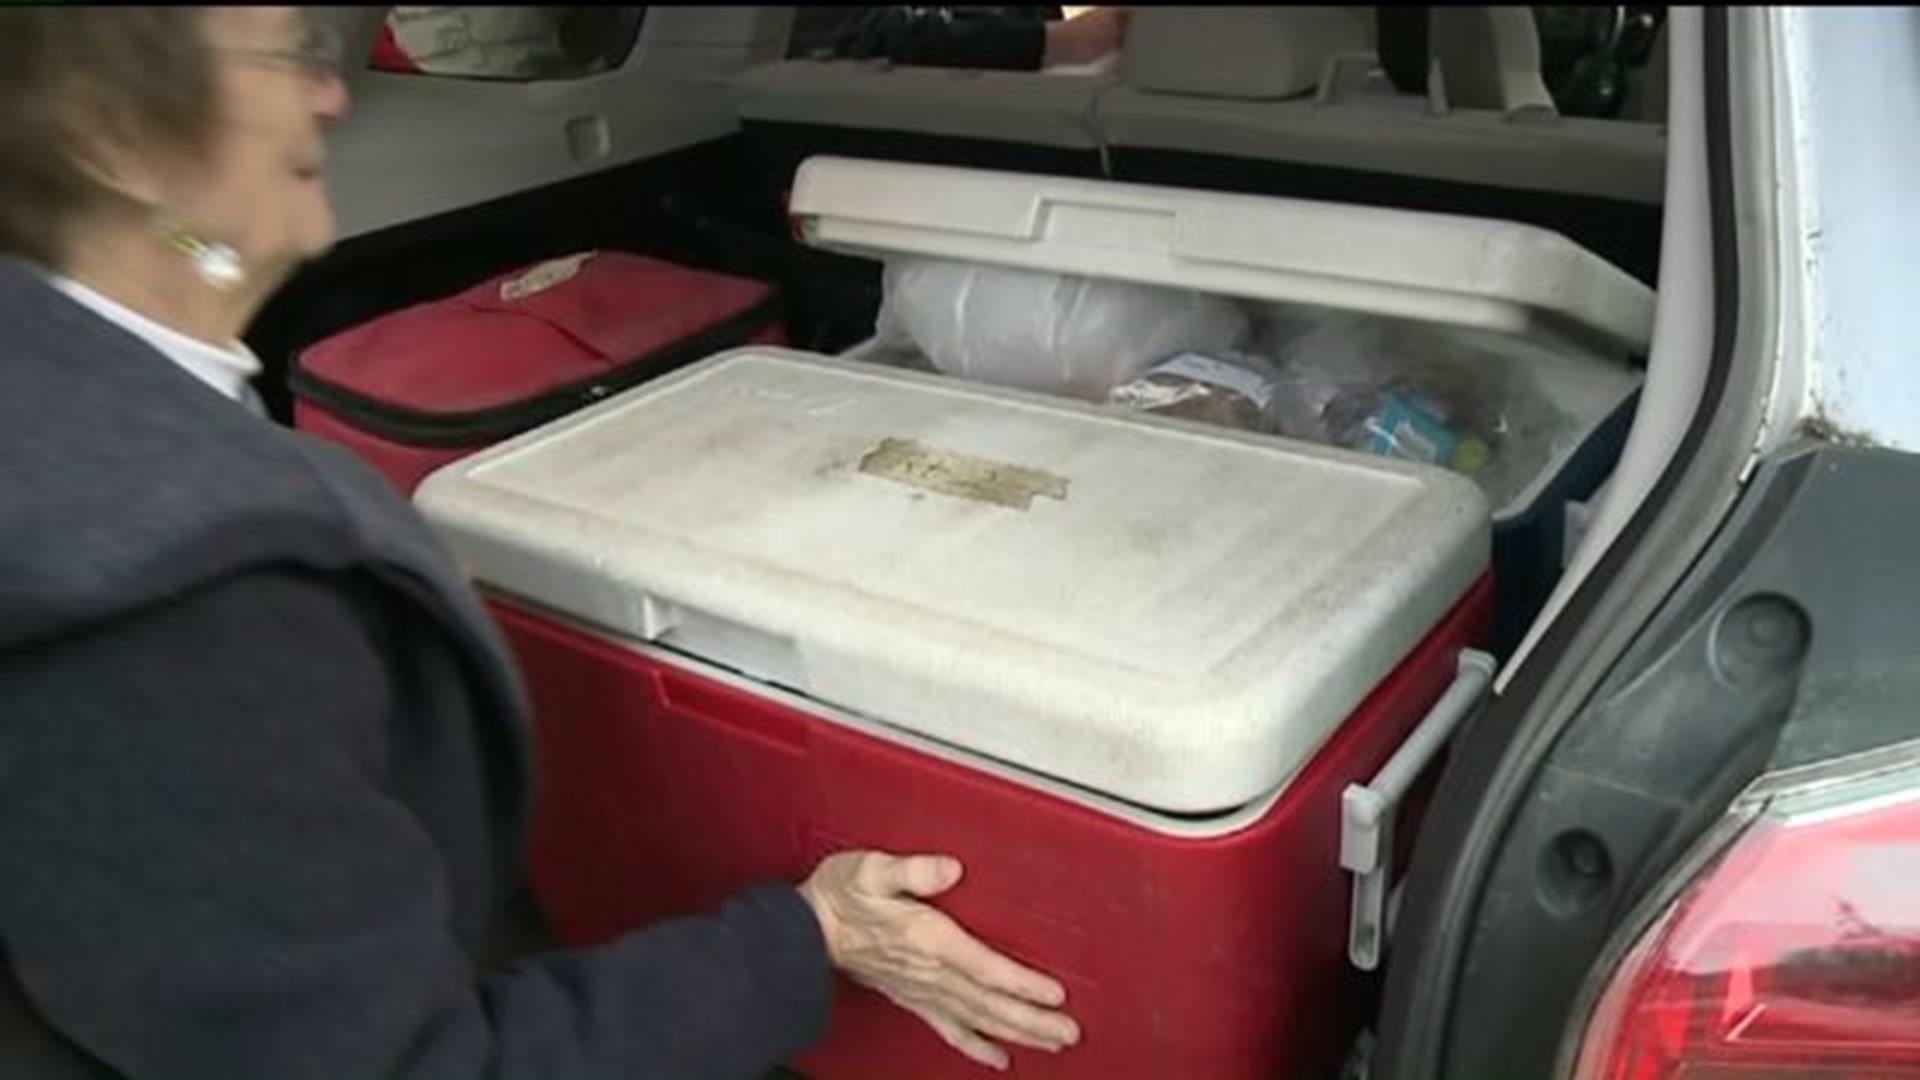 Helping Monroe County Meals on Wheels Spread Holiday Cheer